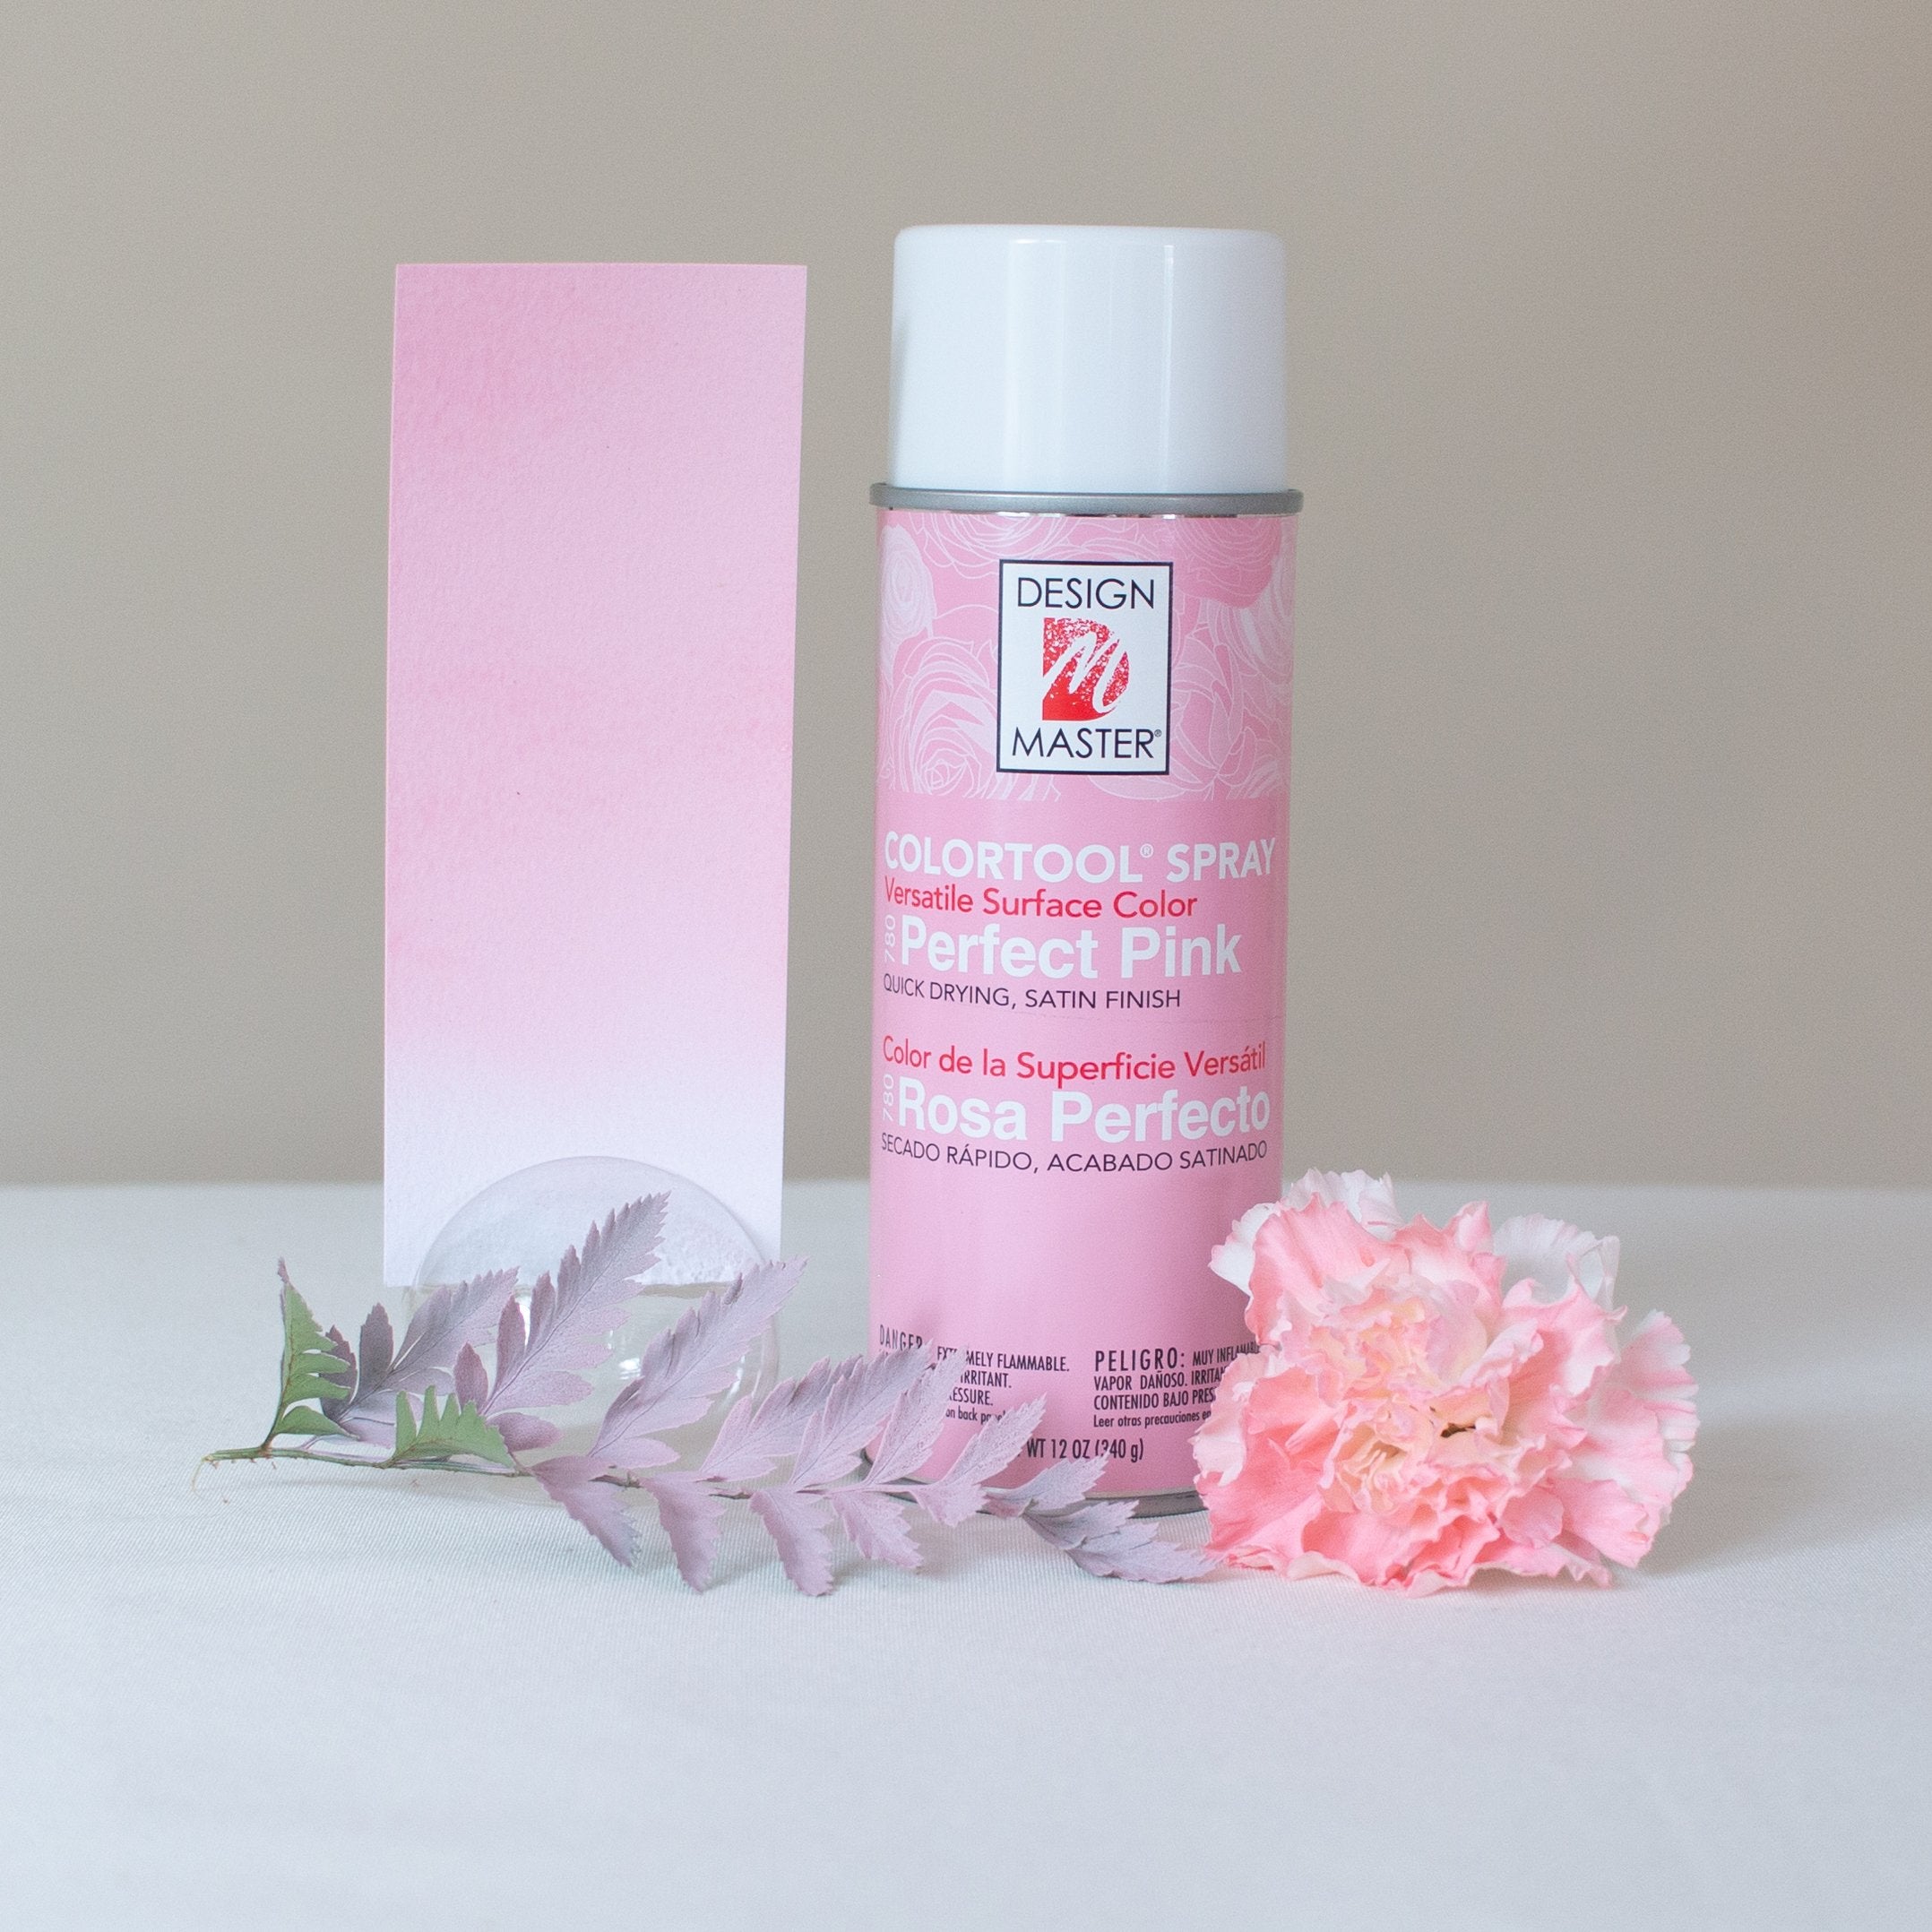 Perfect Pink Design Master Floral Spray Paint, Flower Moxie